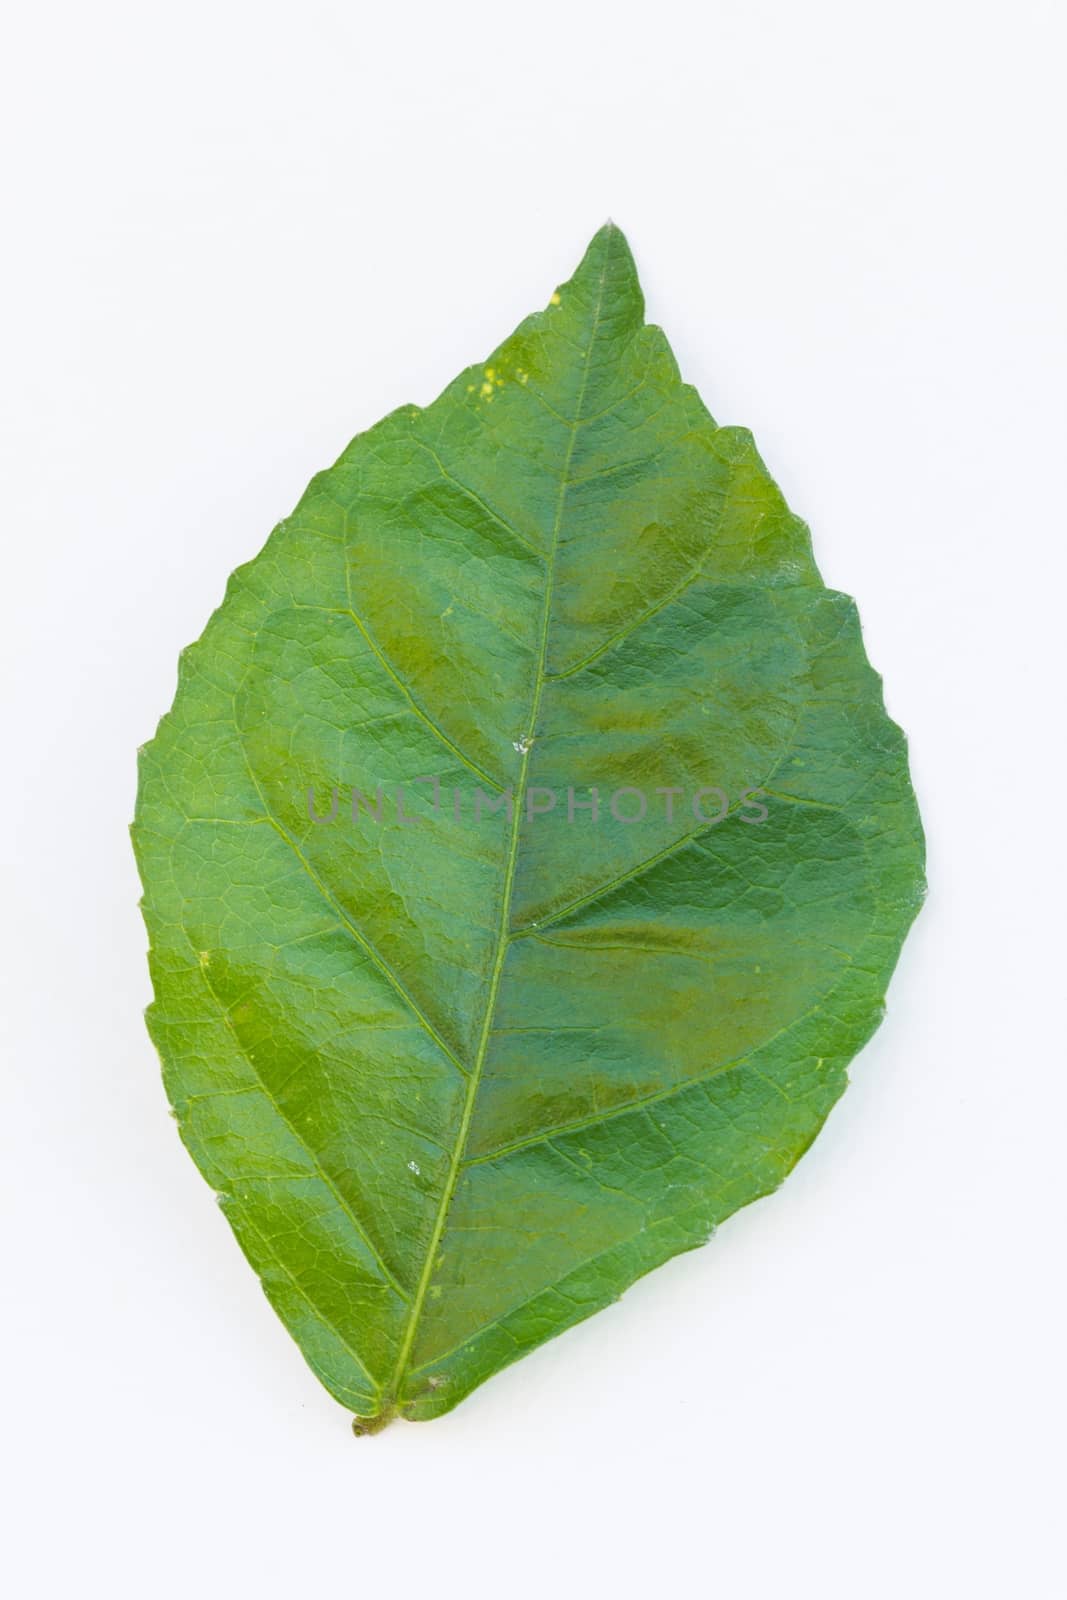 beautiful green leaf isolated on white background. by a3701027